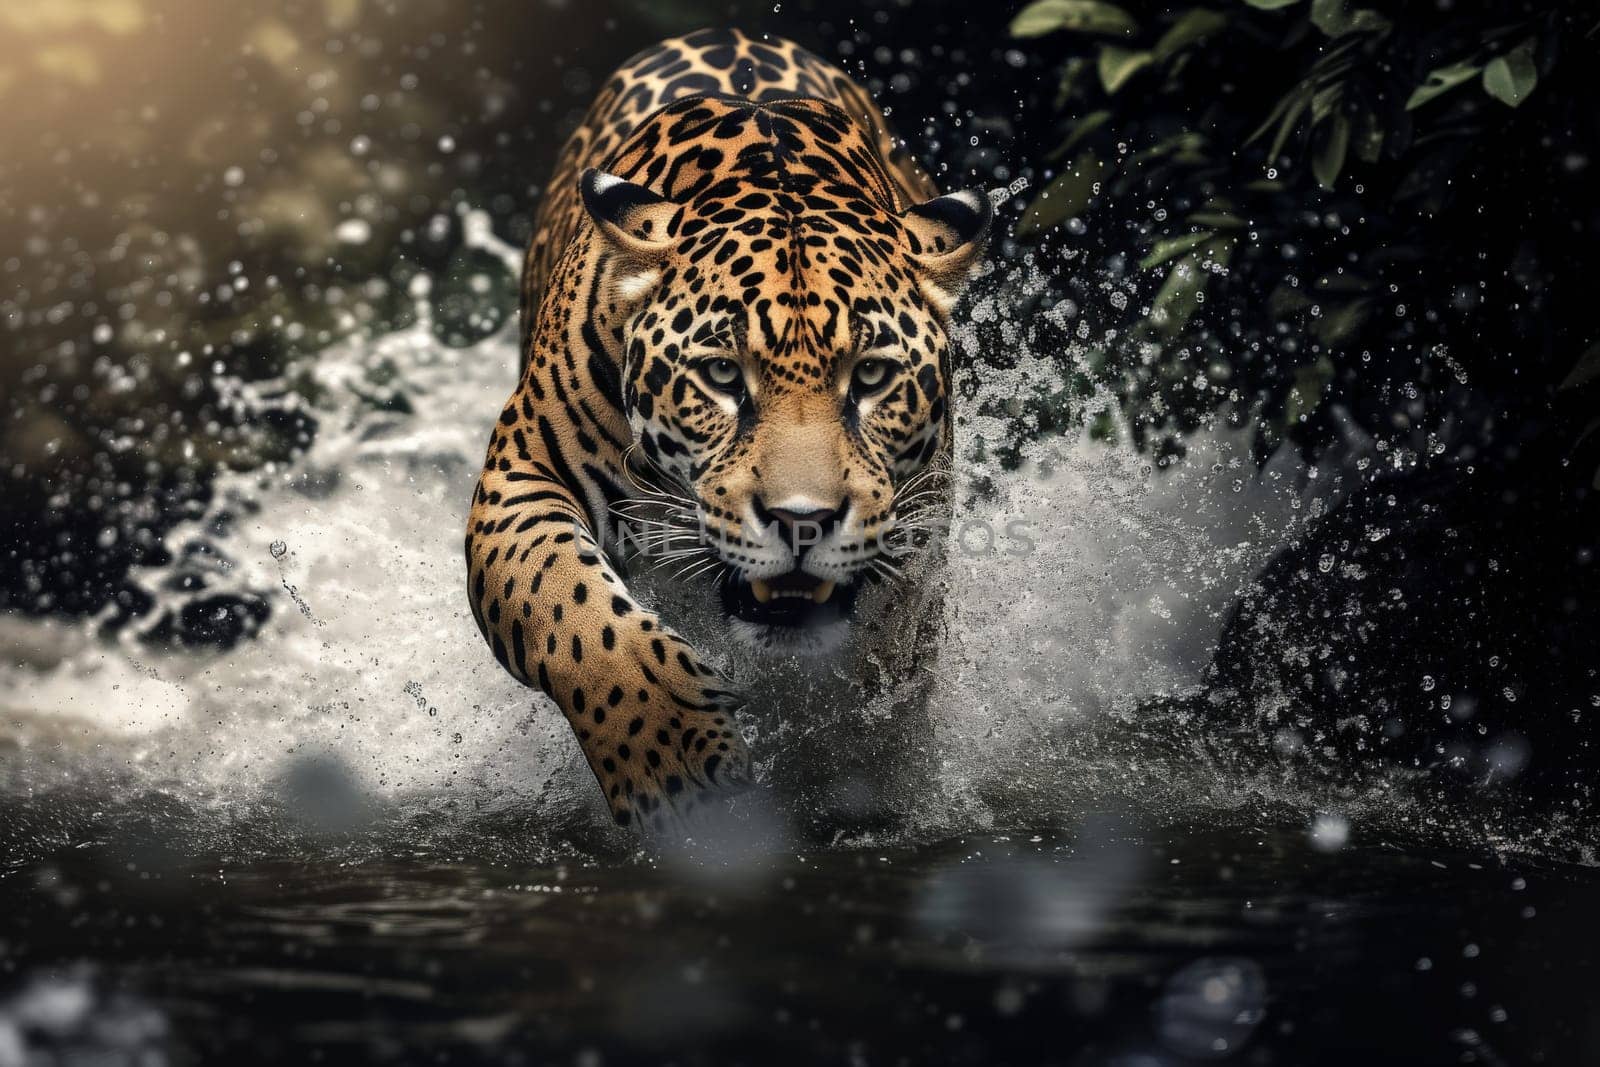 a close up of a leopard in the water with a splash of water on it's face and it's face..